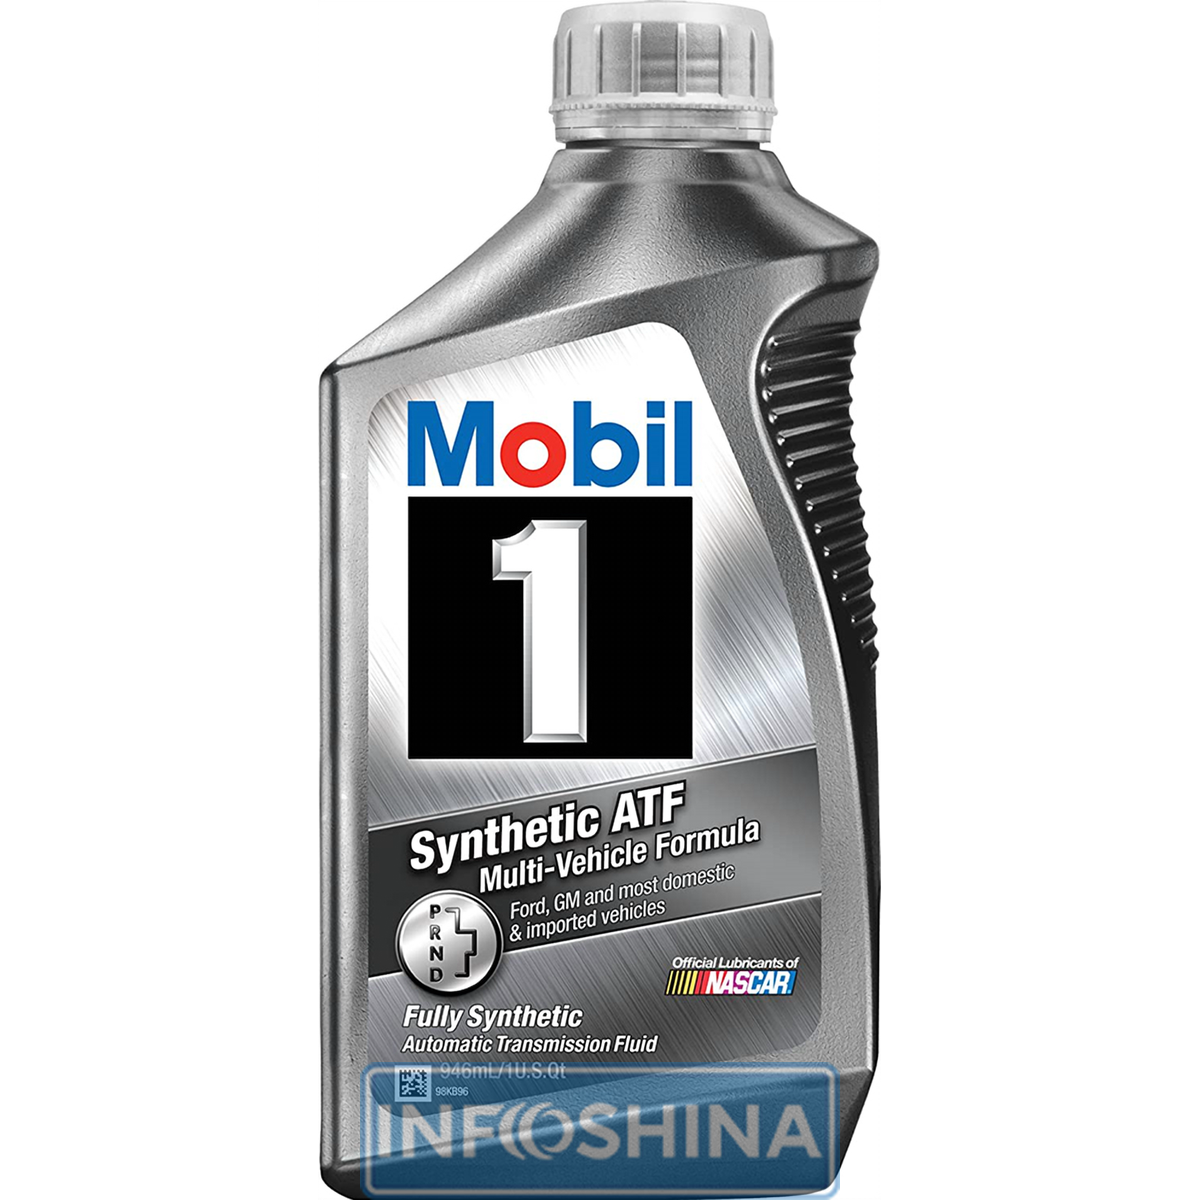 Mobil 1 Synthetic LV ATF HP